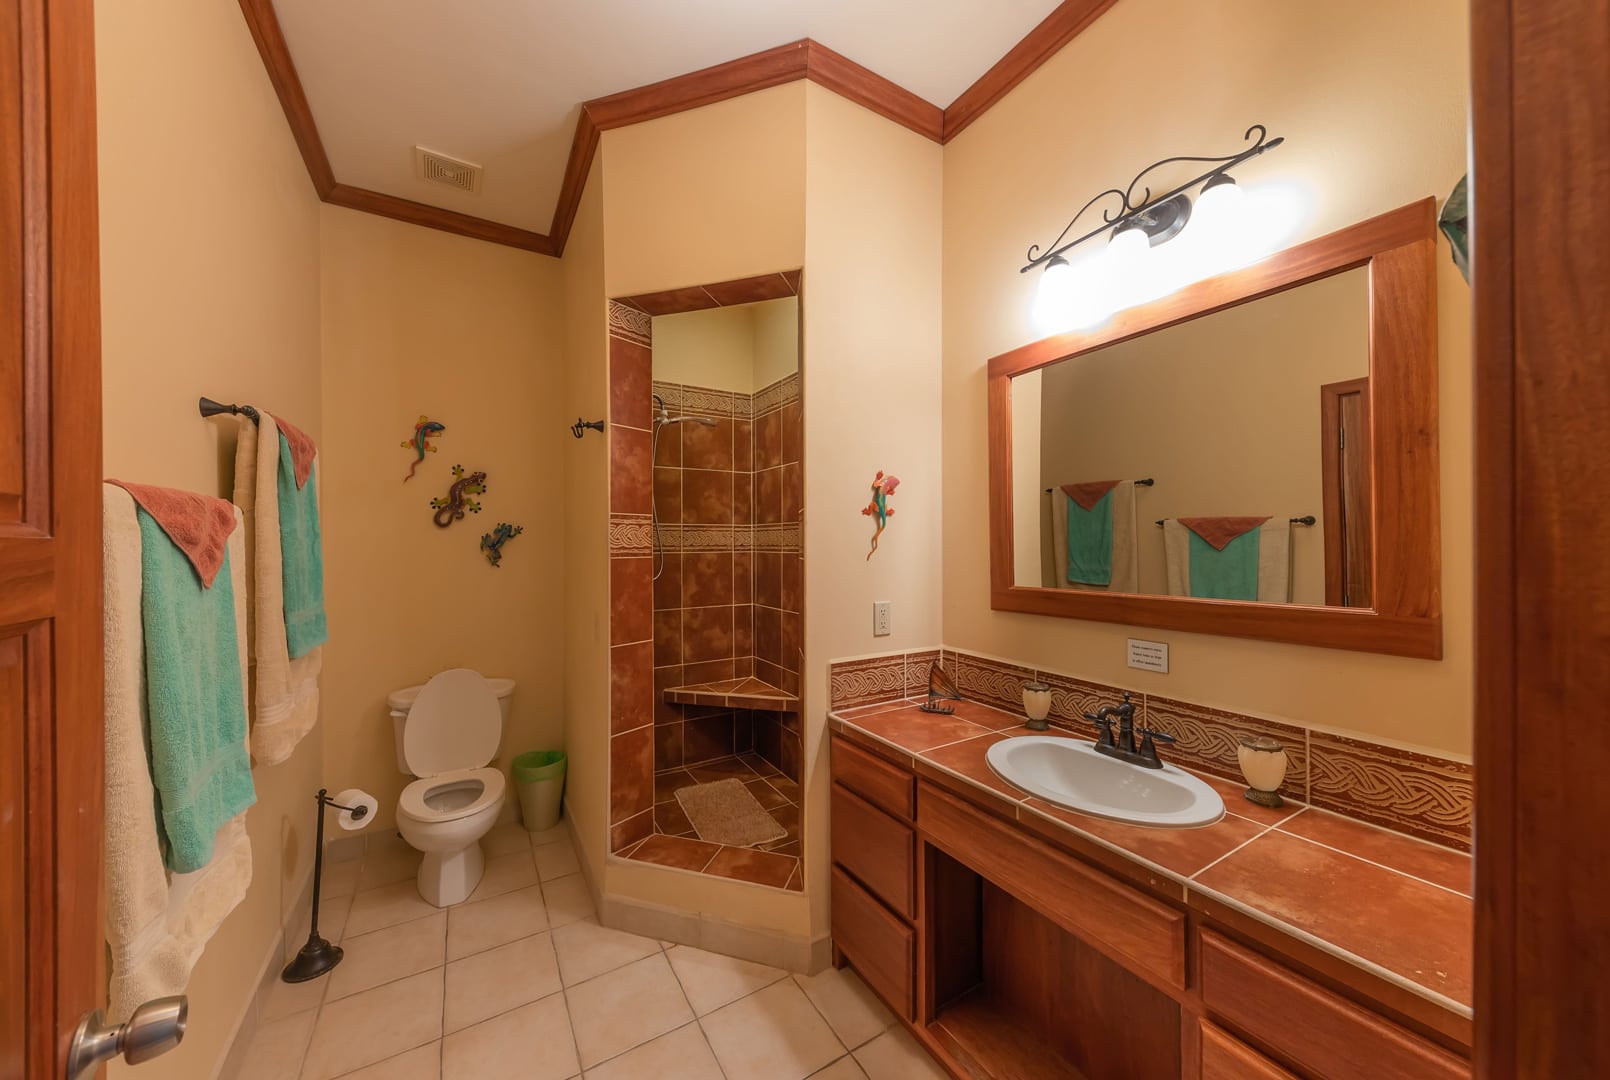 Inviting bathroom equipped with a walk-in shower, a modern sink, and a welcoming ambiance.